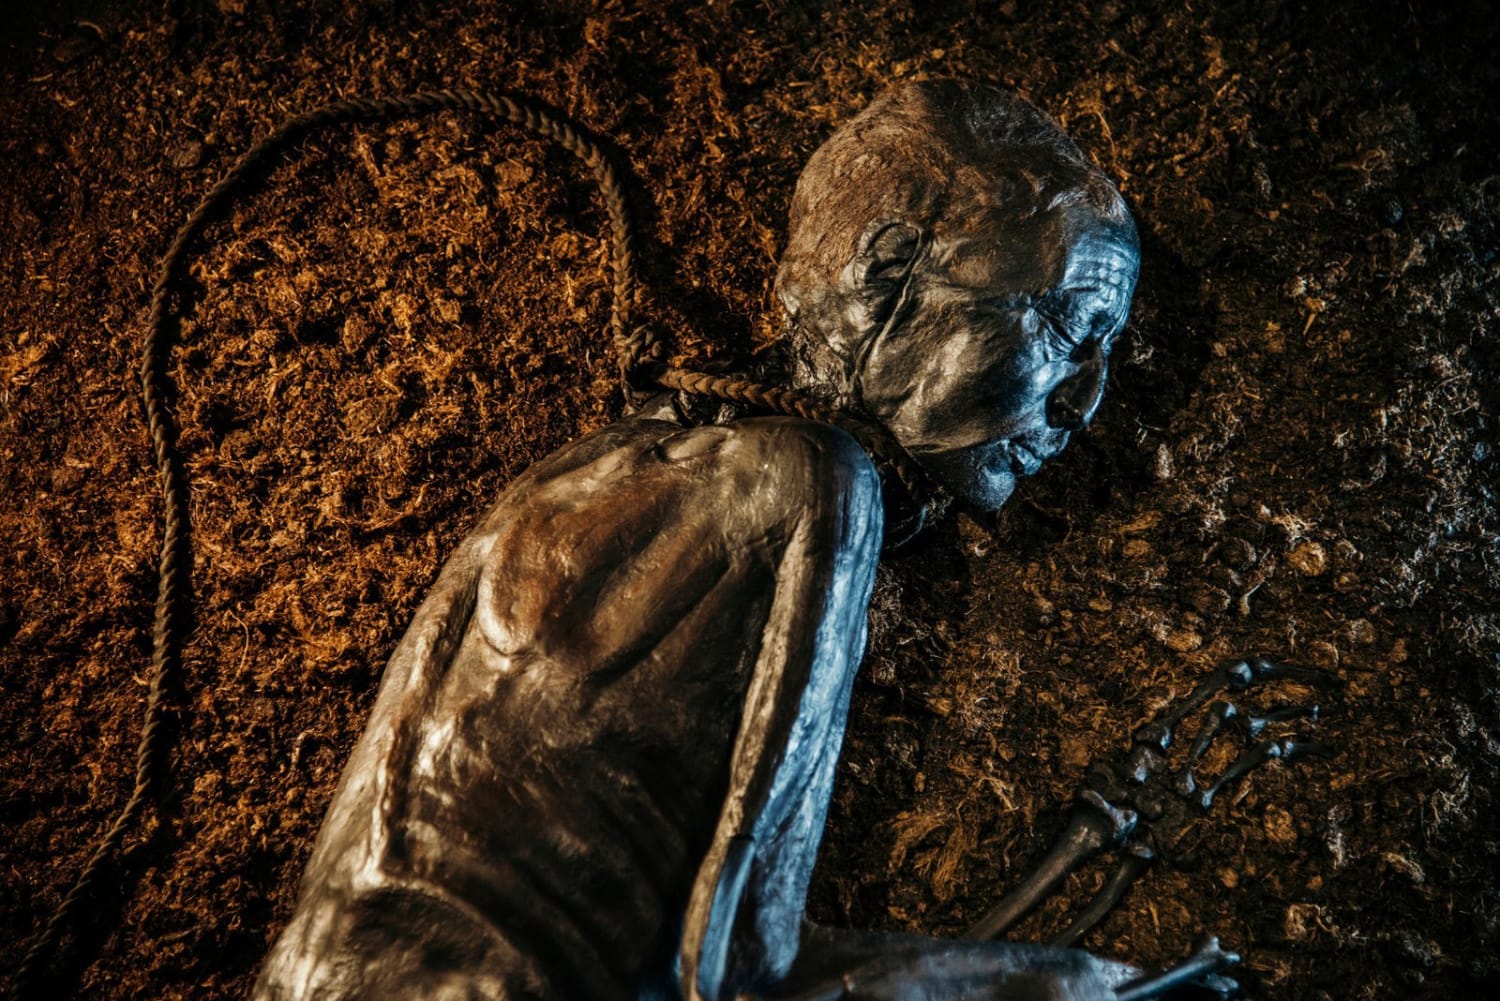 Europe's Famed Bog Bodies Are Starting to Reveal Their Secrets